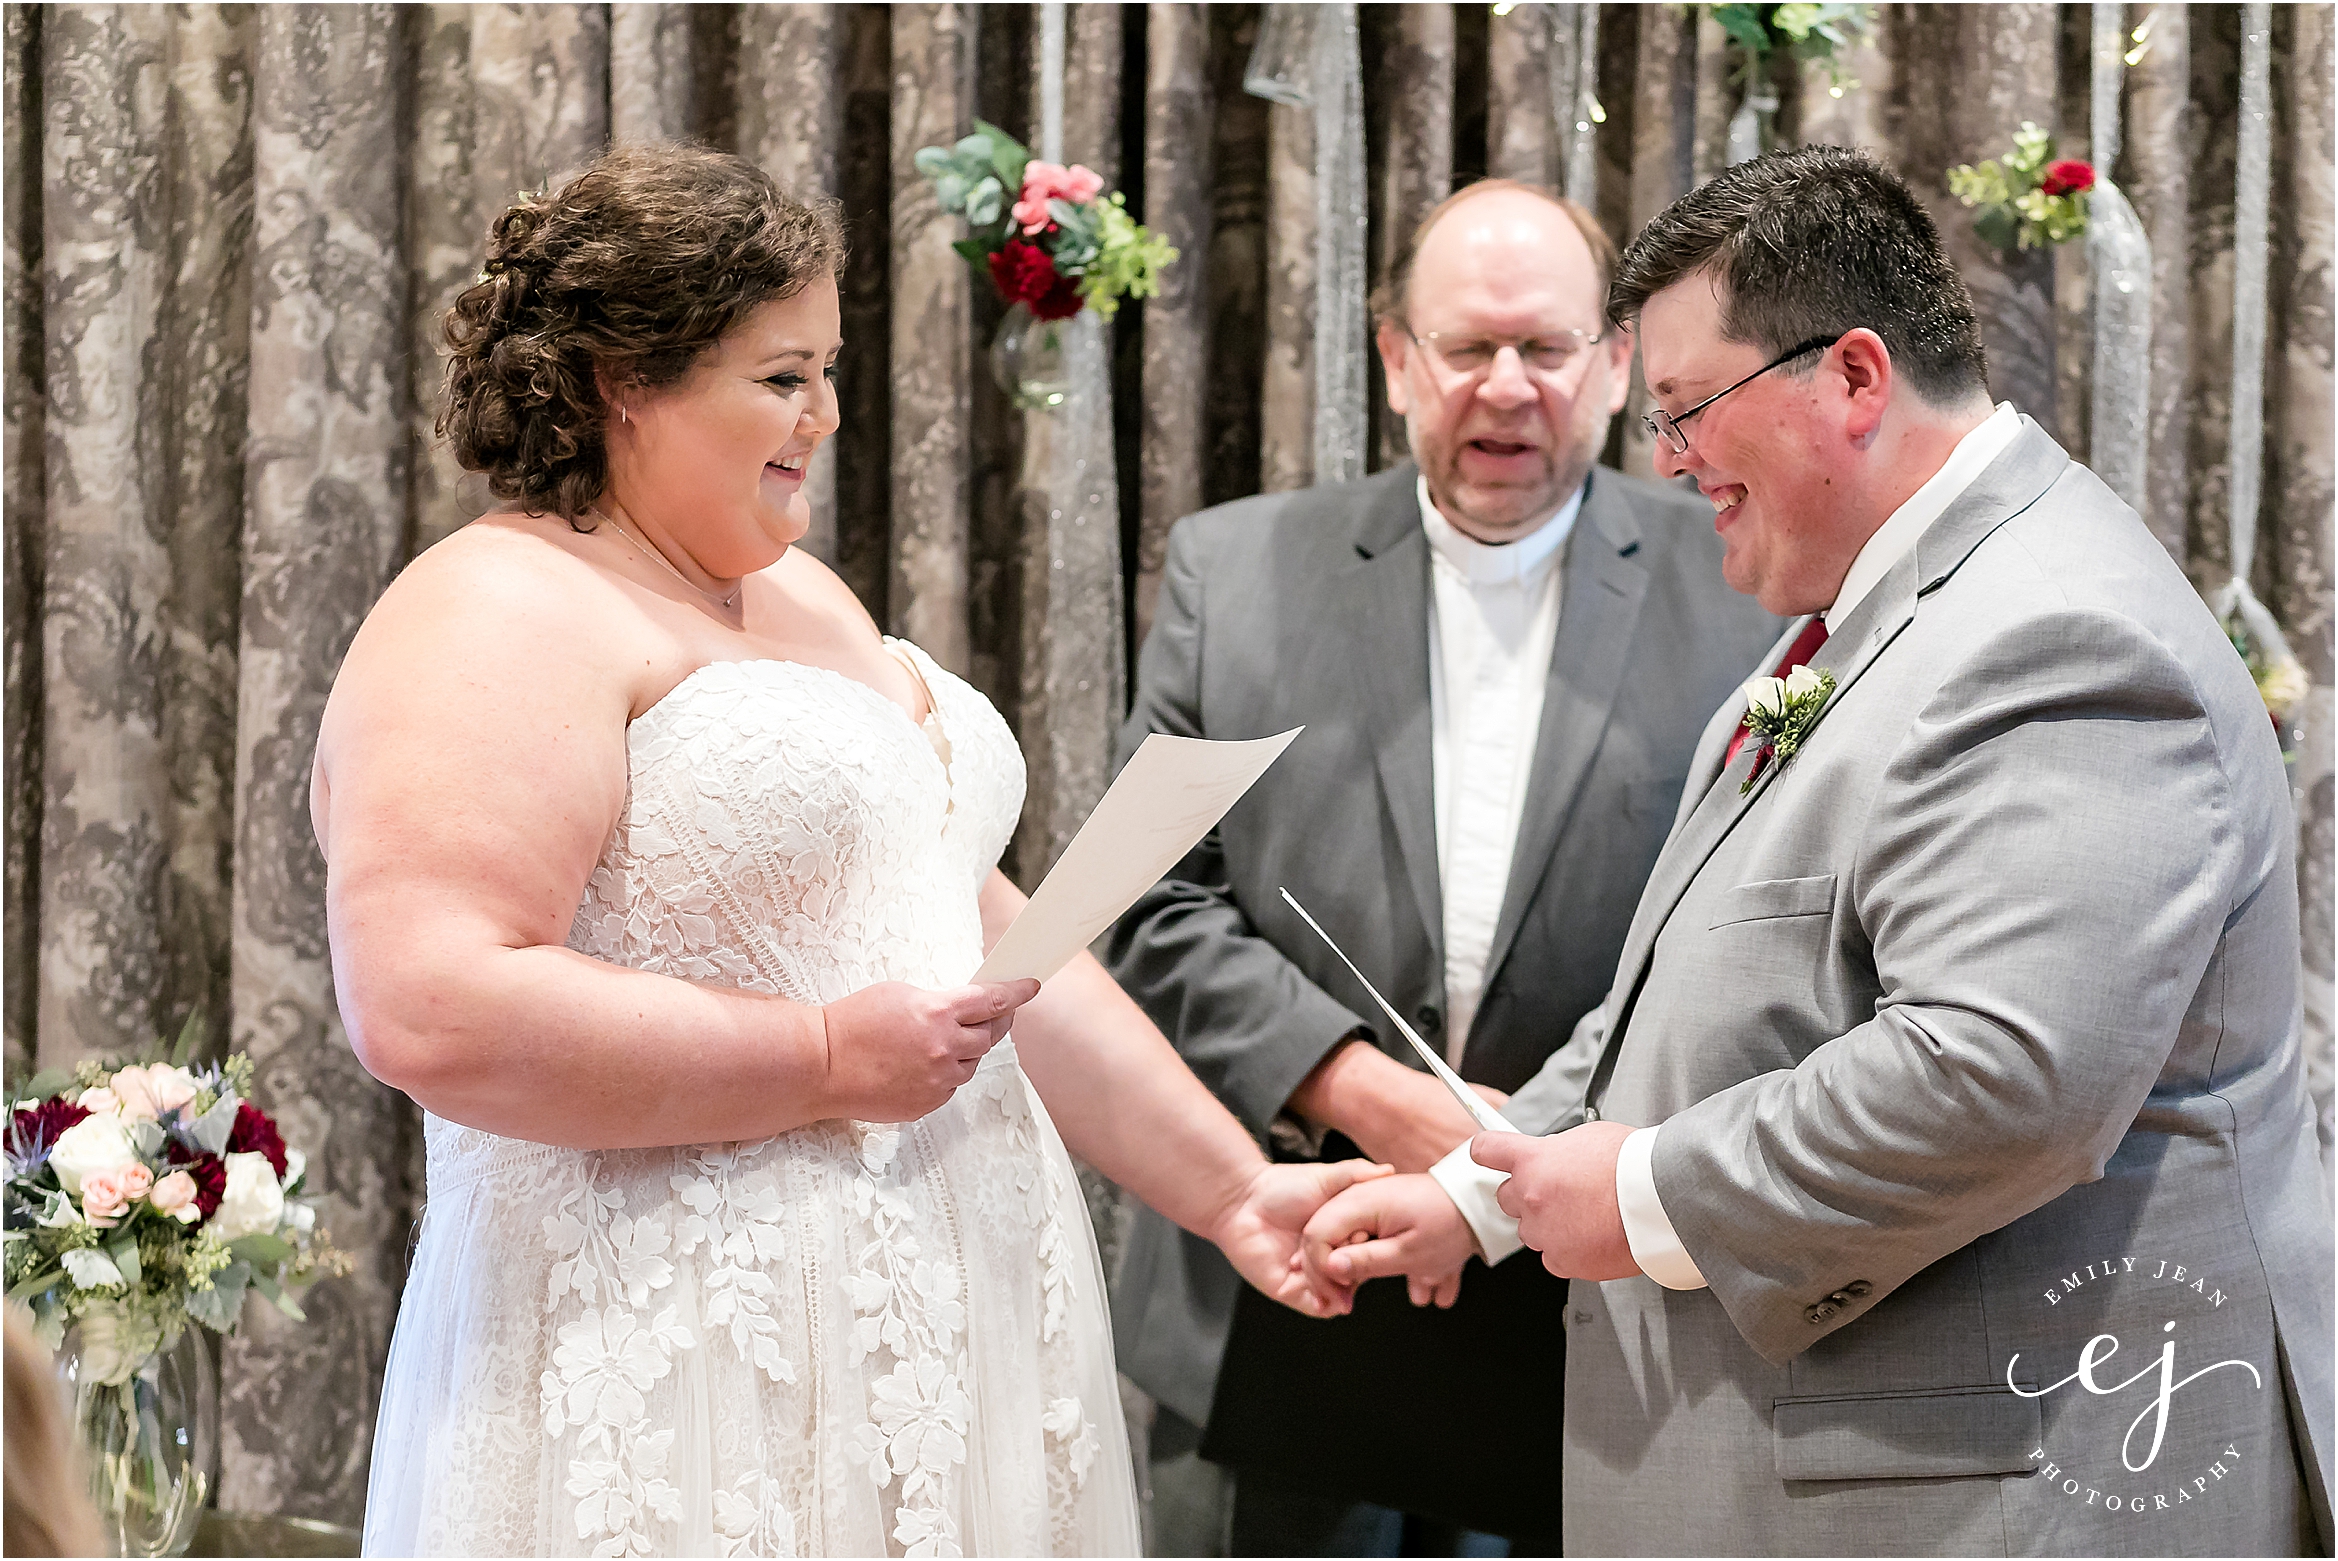 reading vows to each other while holding hand at the charmat hotel in lacrosse wisconsin